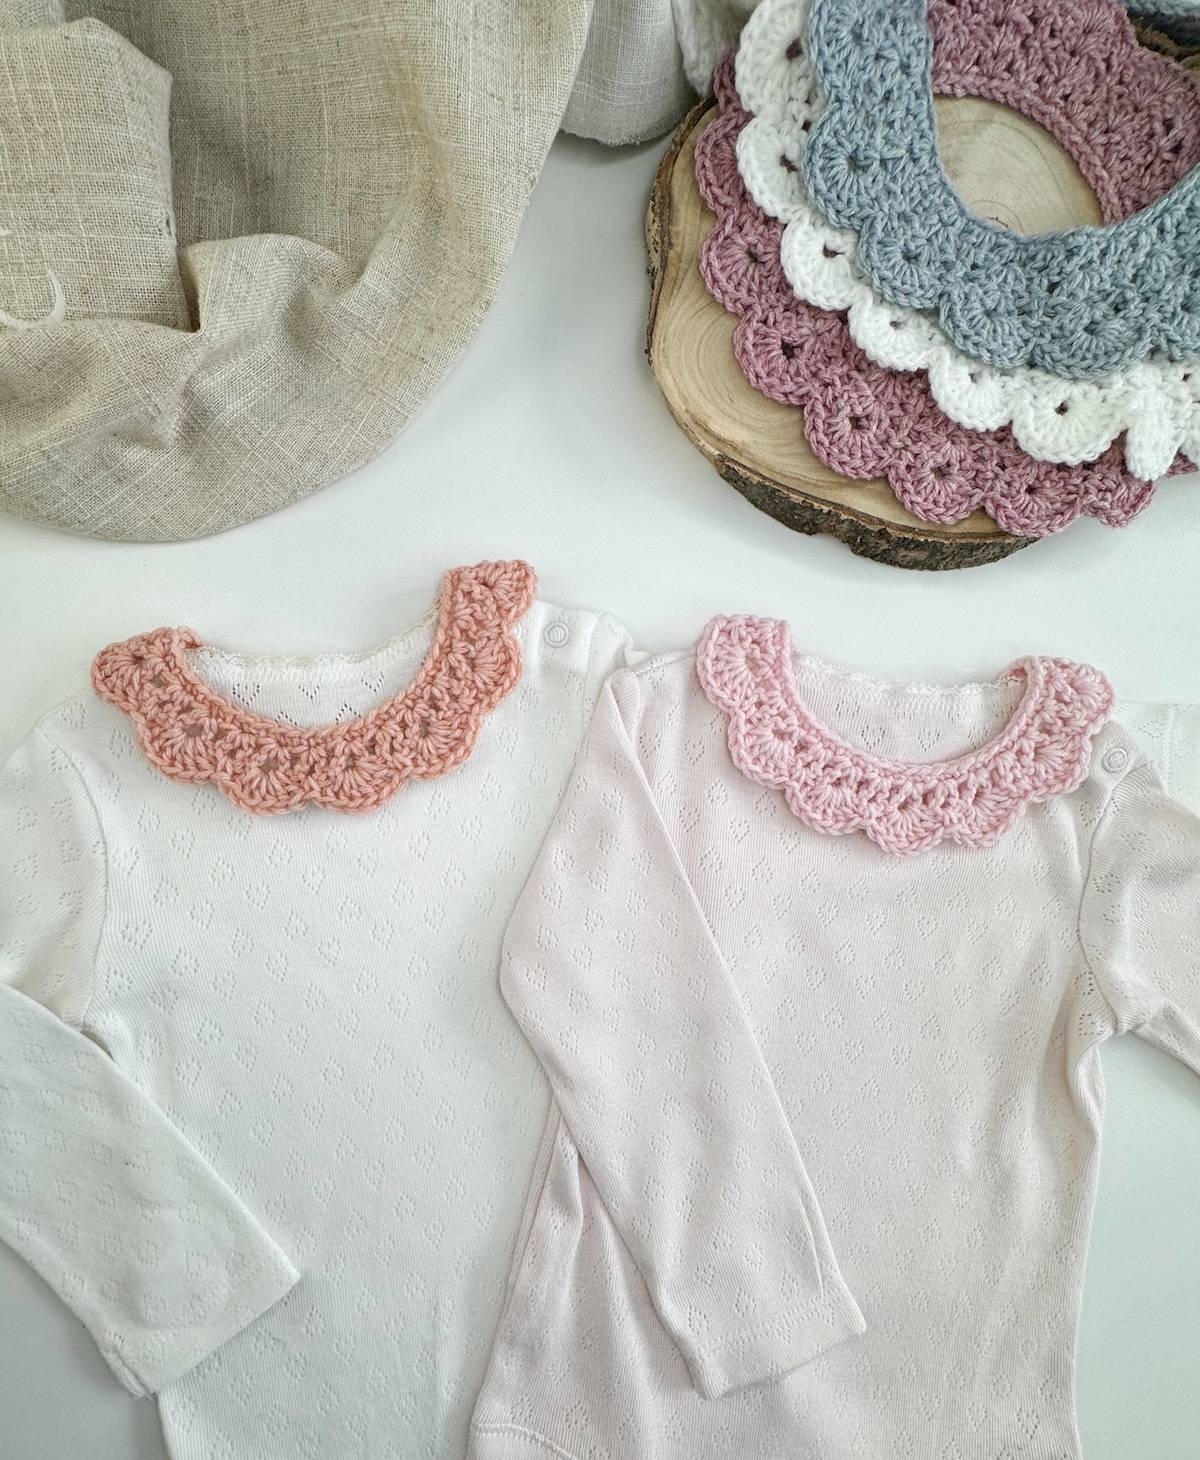 Baby size crocheted collars added to a babygrow on a wooden table.